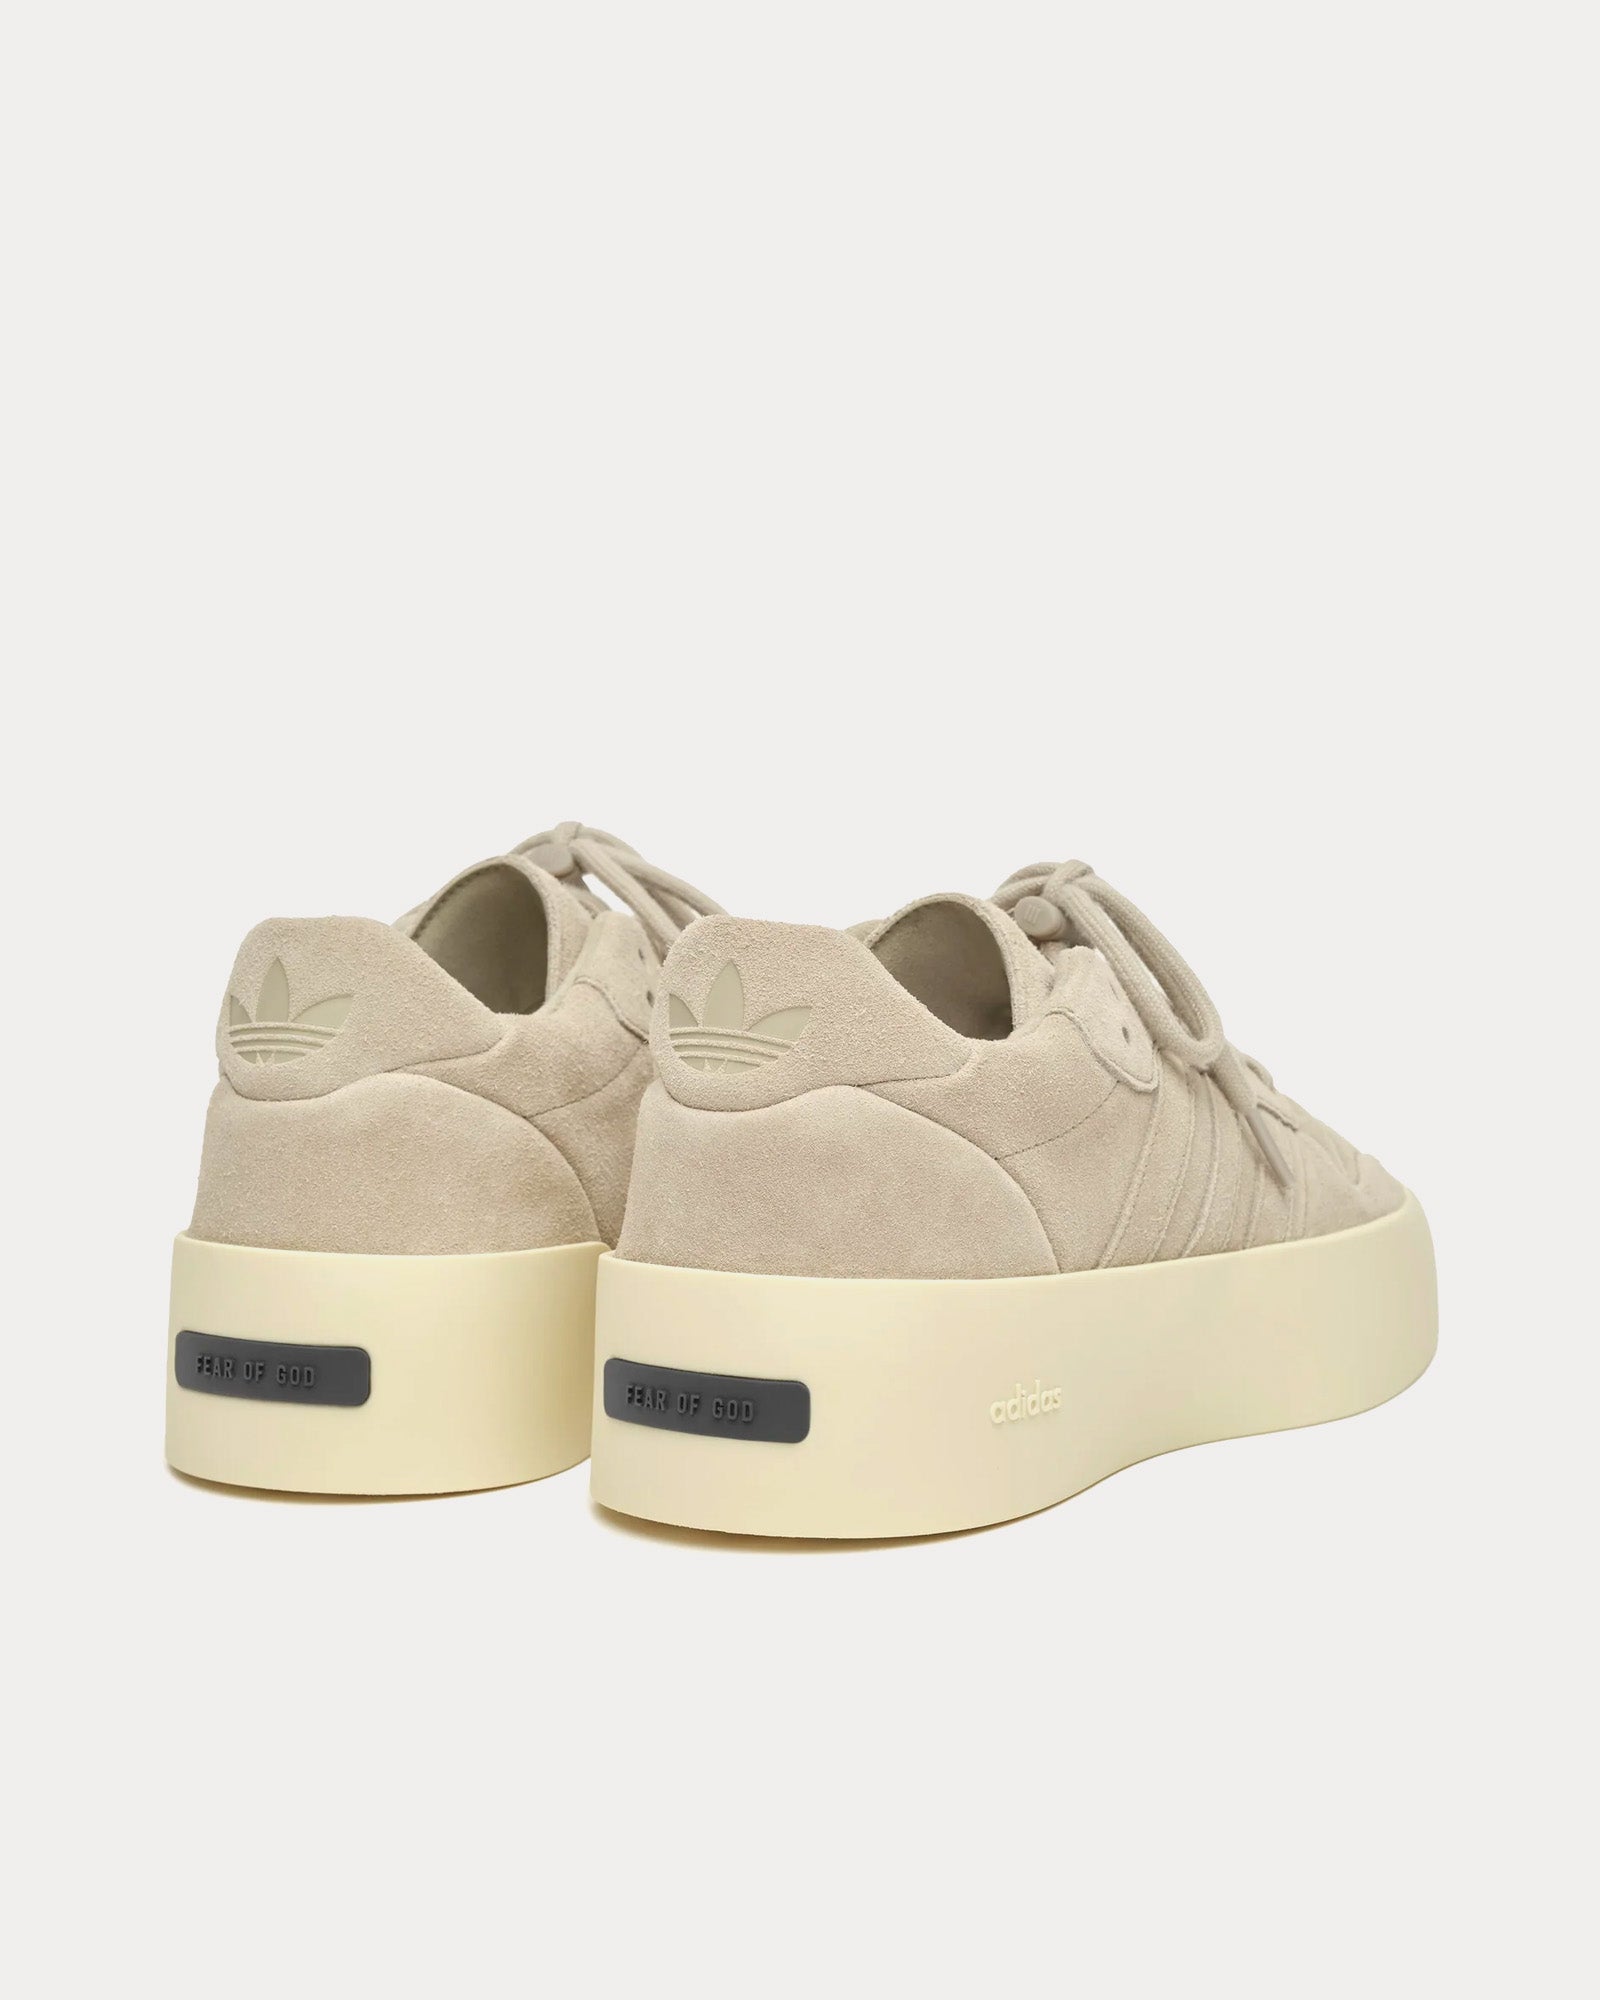 Fear of God Athletics - '86 Lo Sesame Low Top Sneakers